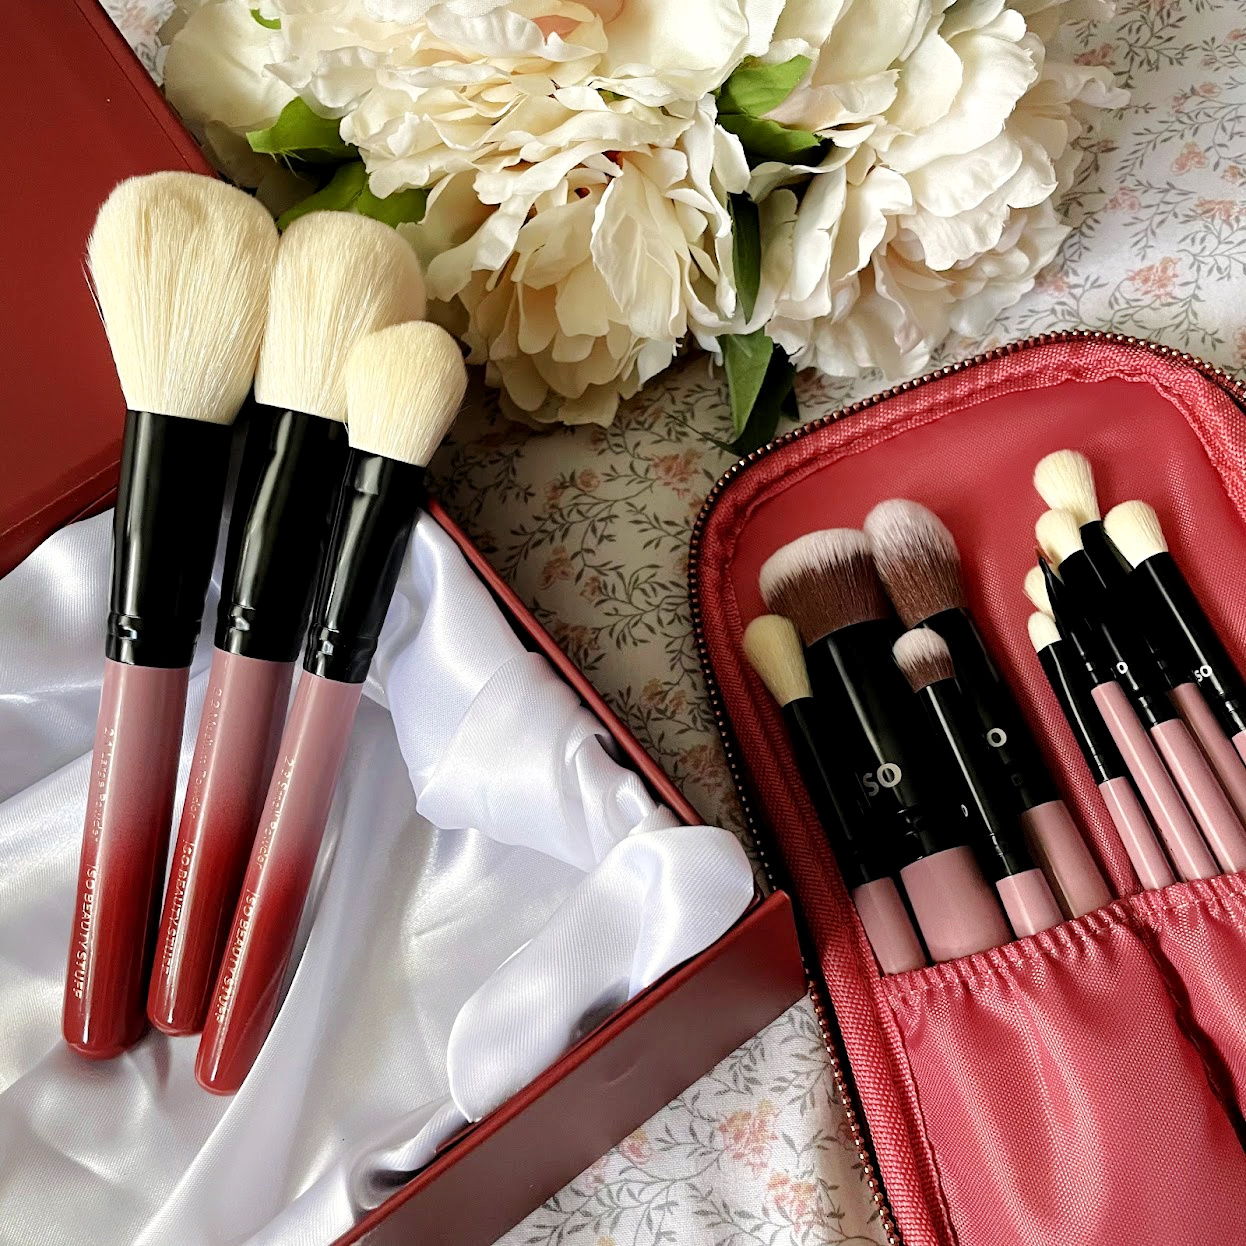 Danielle Levy, SoBeautyStuff, vegan makeup brushes, cruelty free makeup brushes, beauty blogger, Wirral blogger, Liverpool blogger,